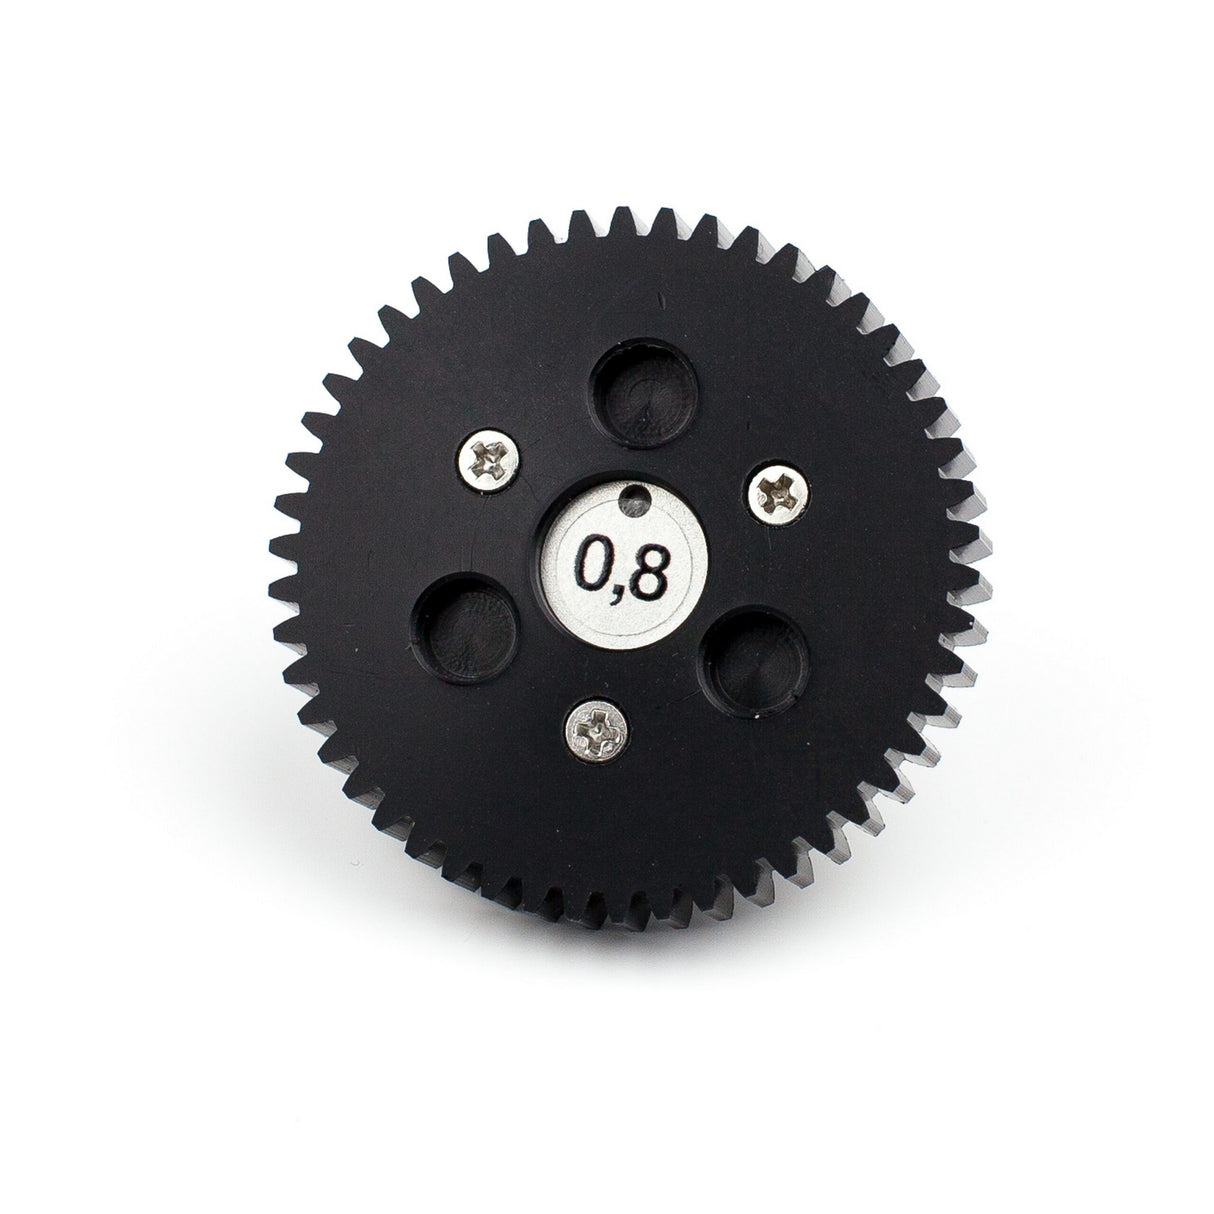 Heden M26 0.8 Dual Pin Snap-On Gear